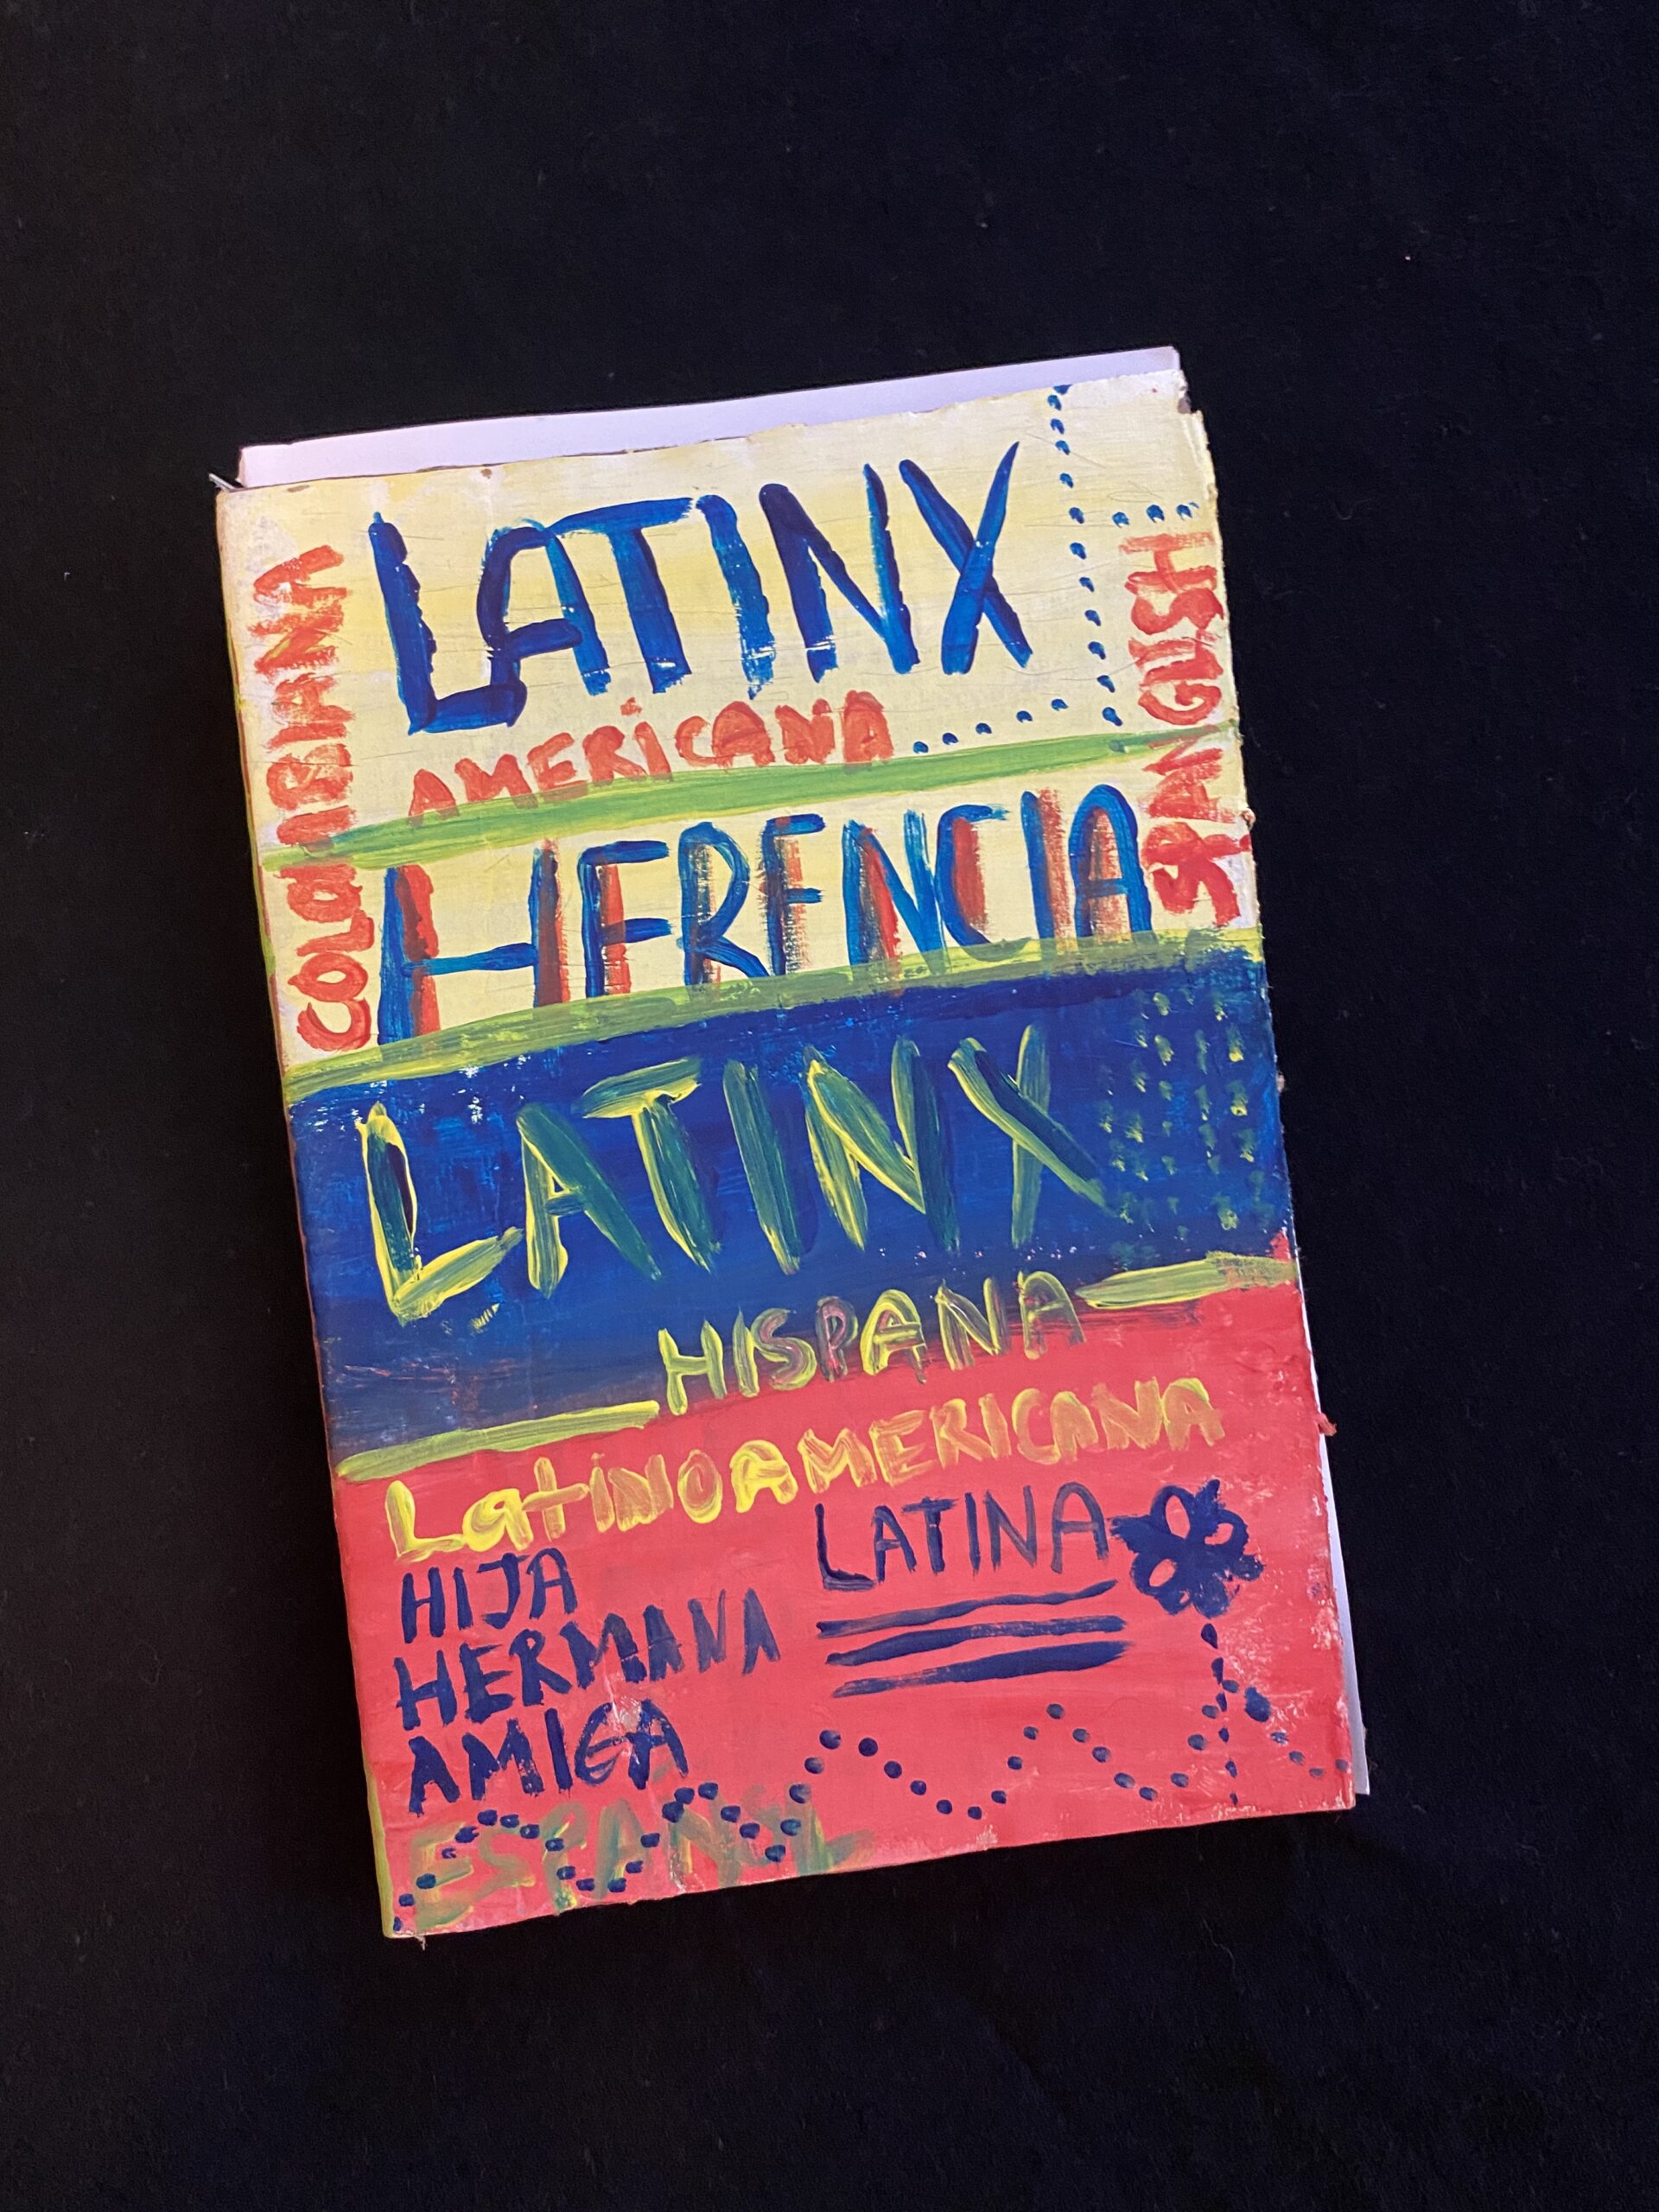 hand-painted cartonera book with horizontal bands corresponding to the Colombian flag--yellow, blue, red--that reads "Latinx Herencia"